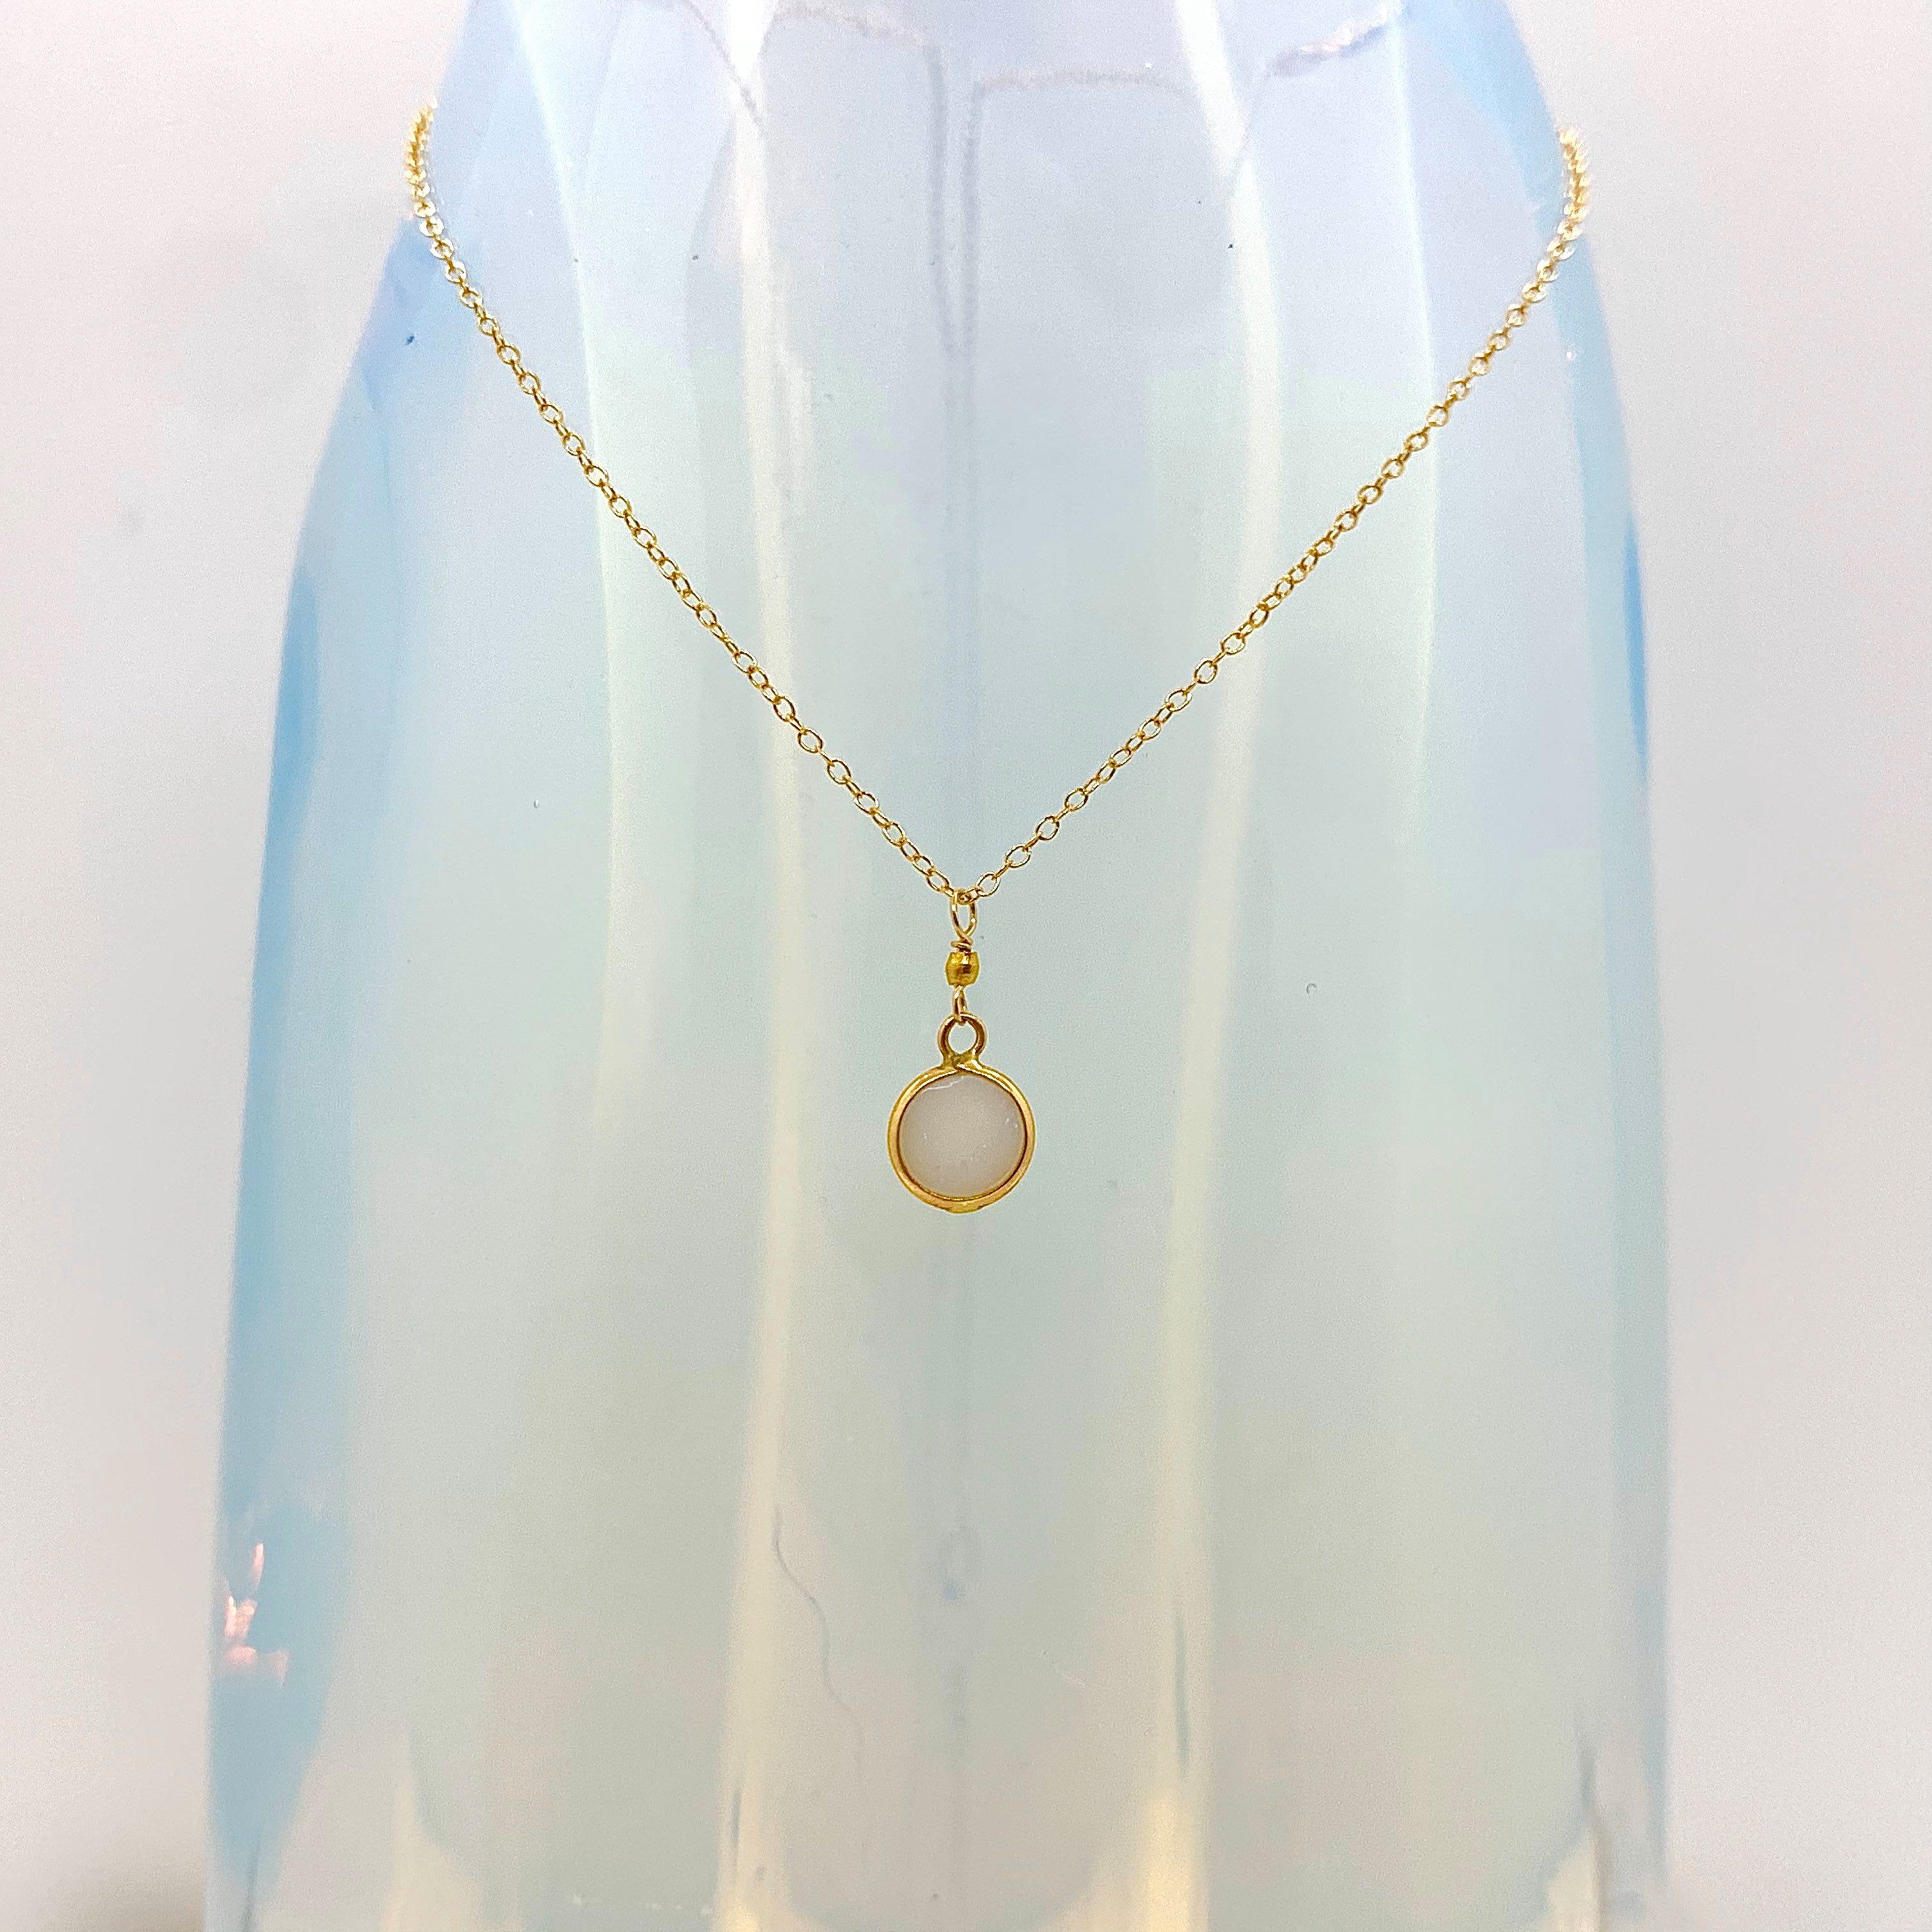 14k Gold Chain Necklace w/ 14k Gold Opal Pendant & 18k Gold Nugget